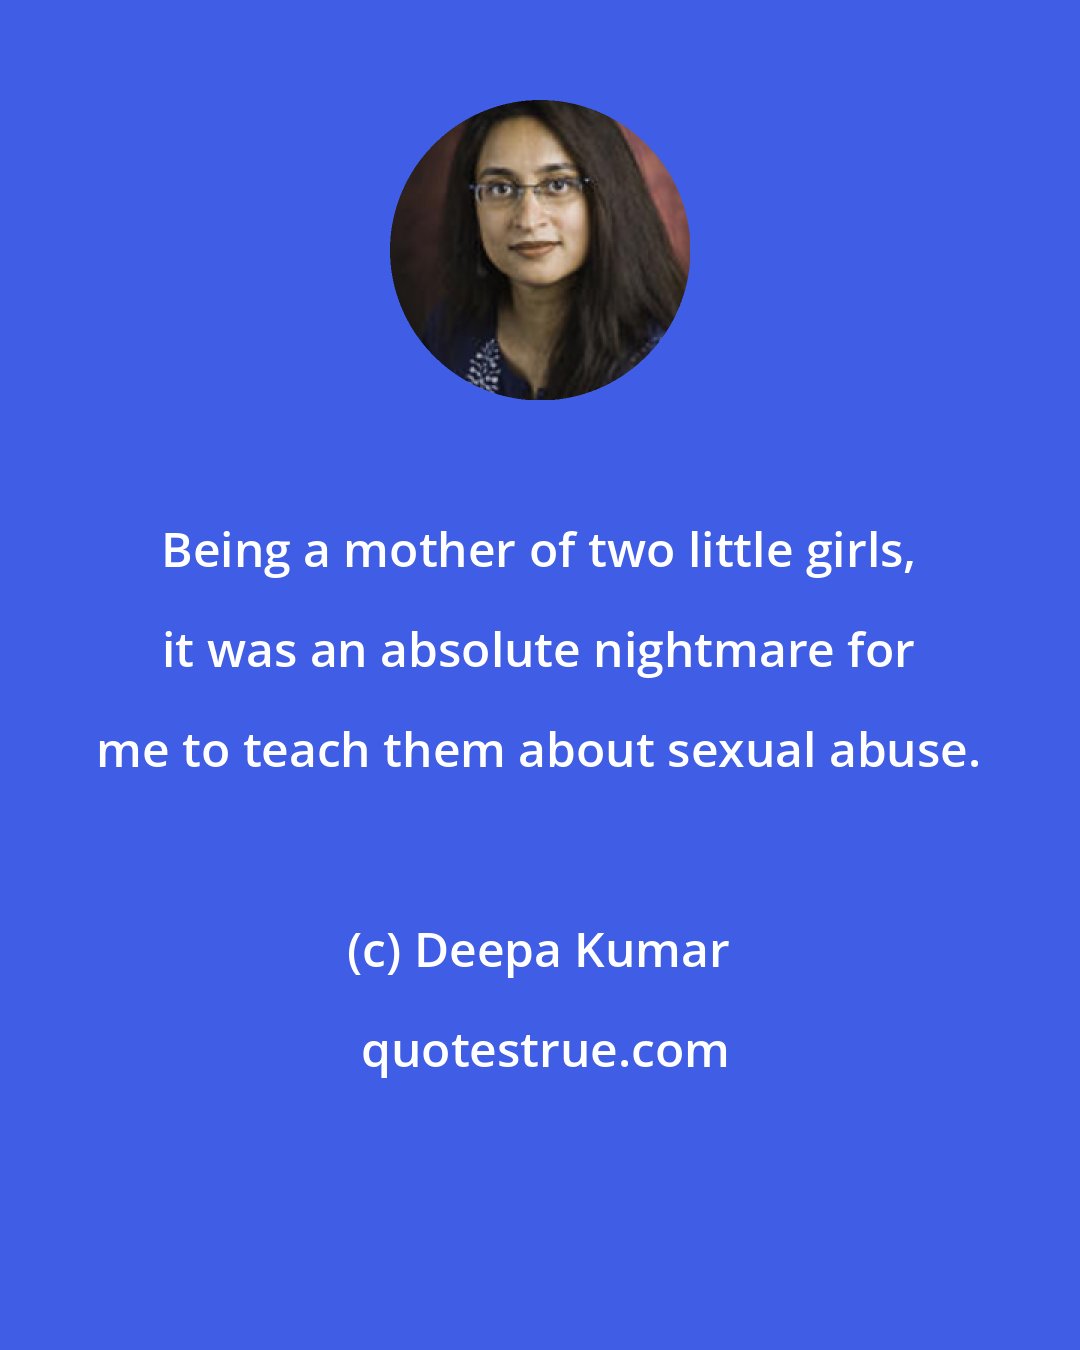 Deepa Kumar: Being a mother of two little girls, it was an absolute nightmare for me to teach them about sexual abuse.